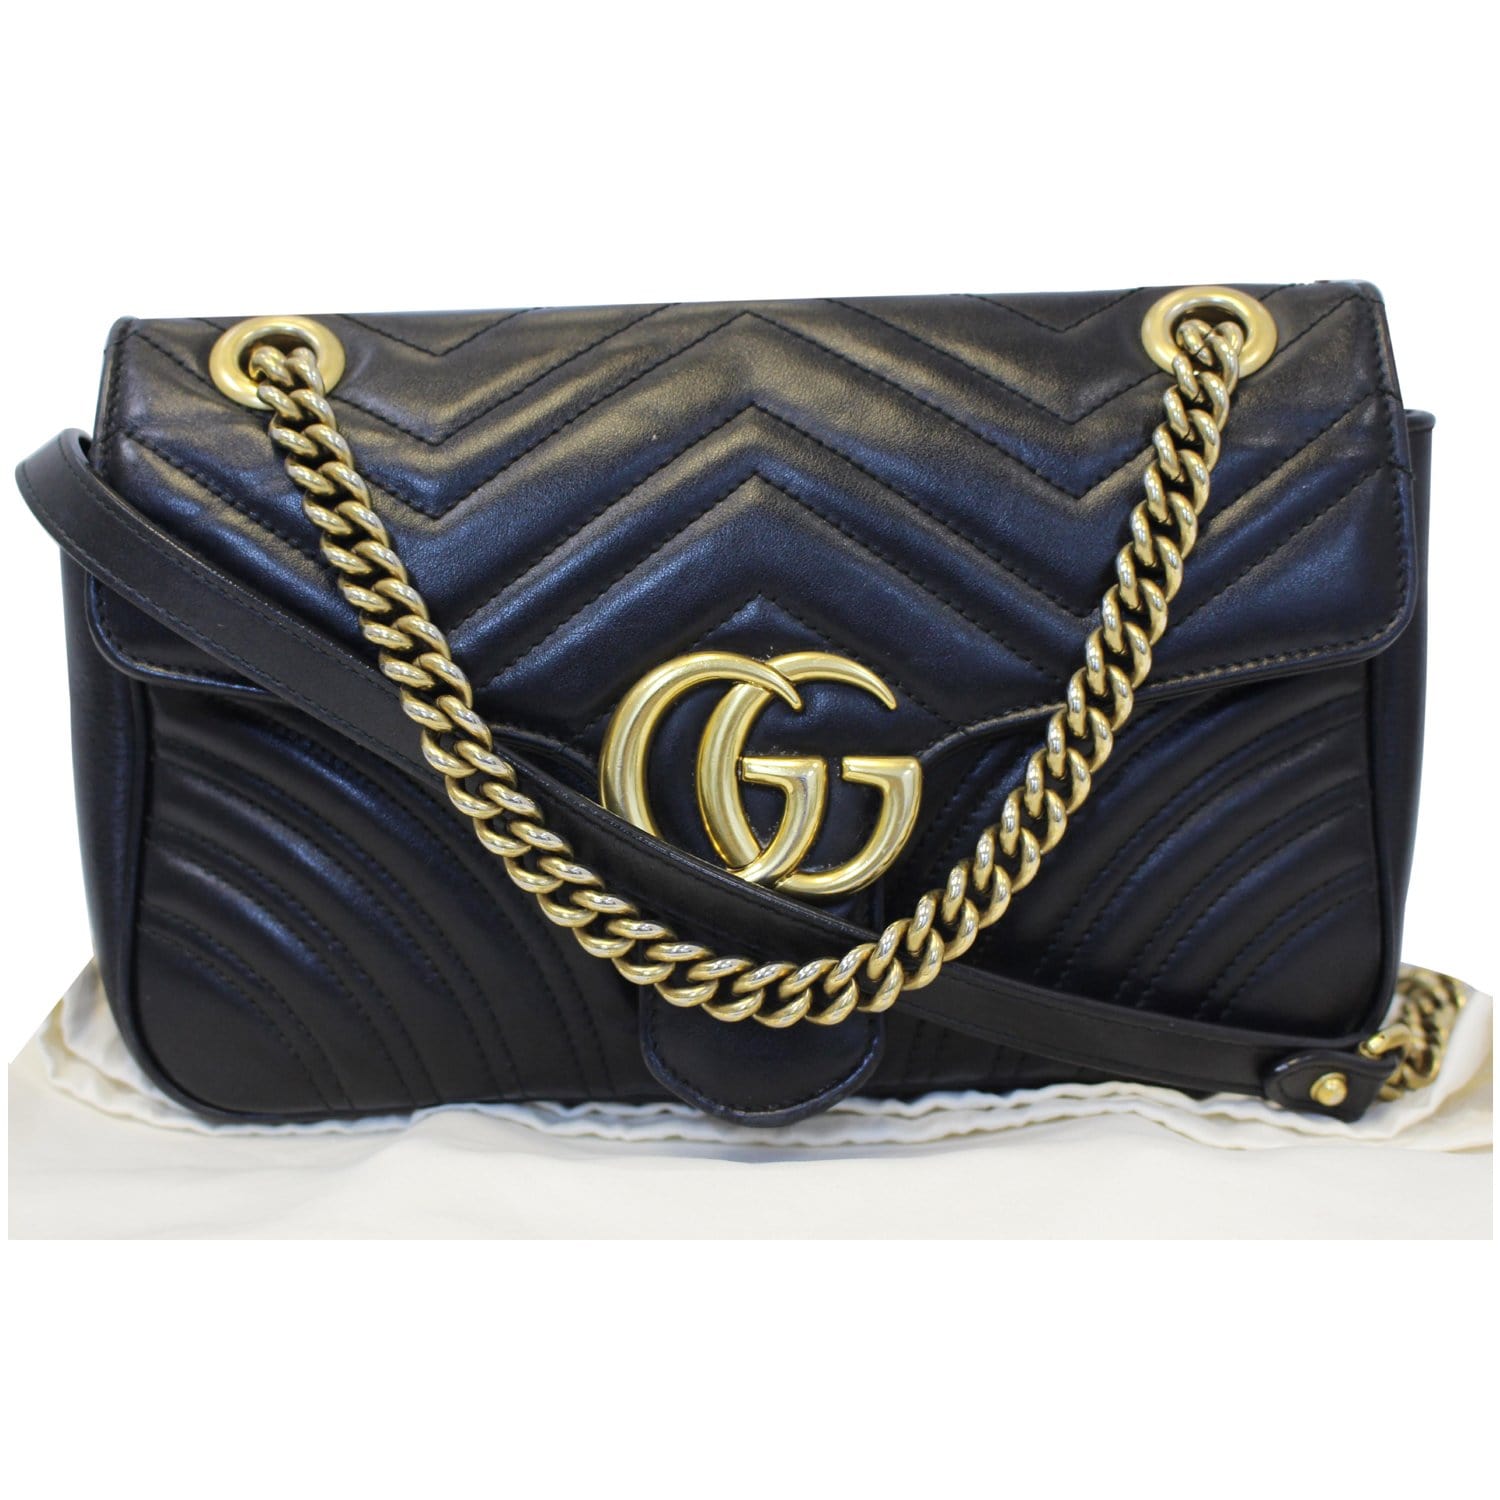 Gucci Gg Marmont Small Quilted Leather Shoulder Bag - Black